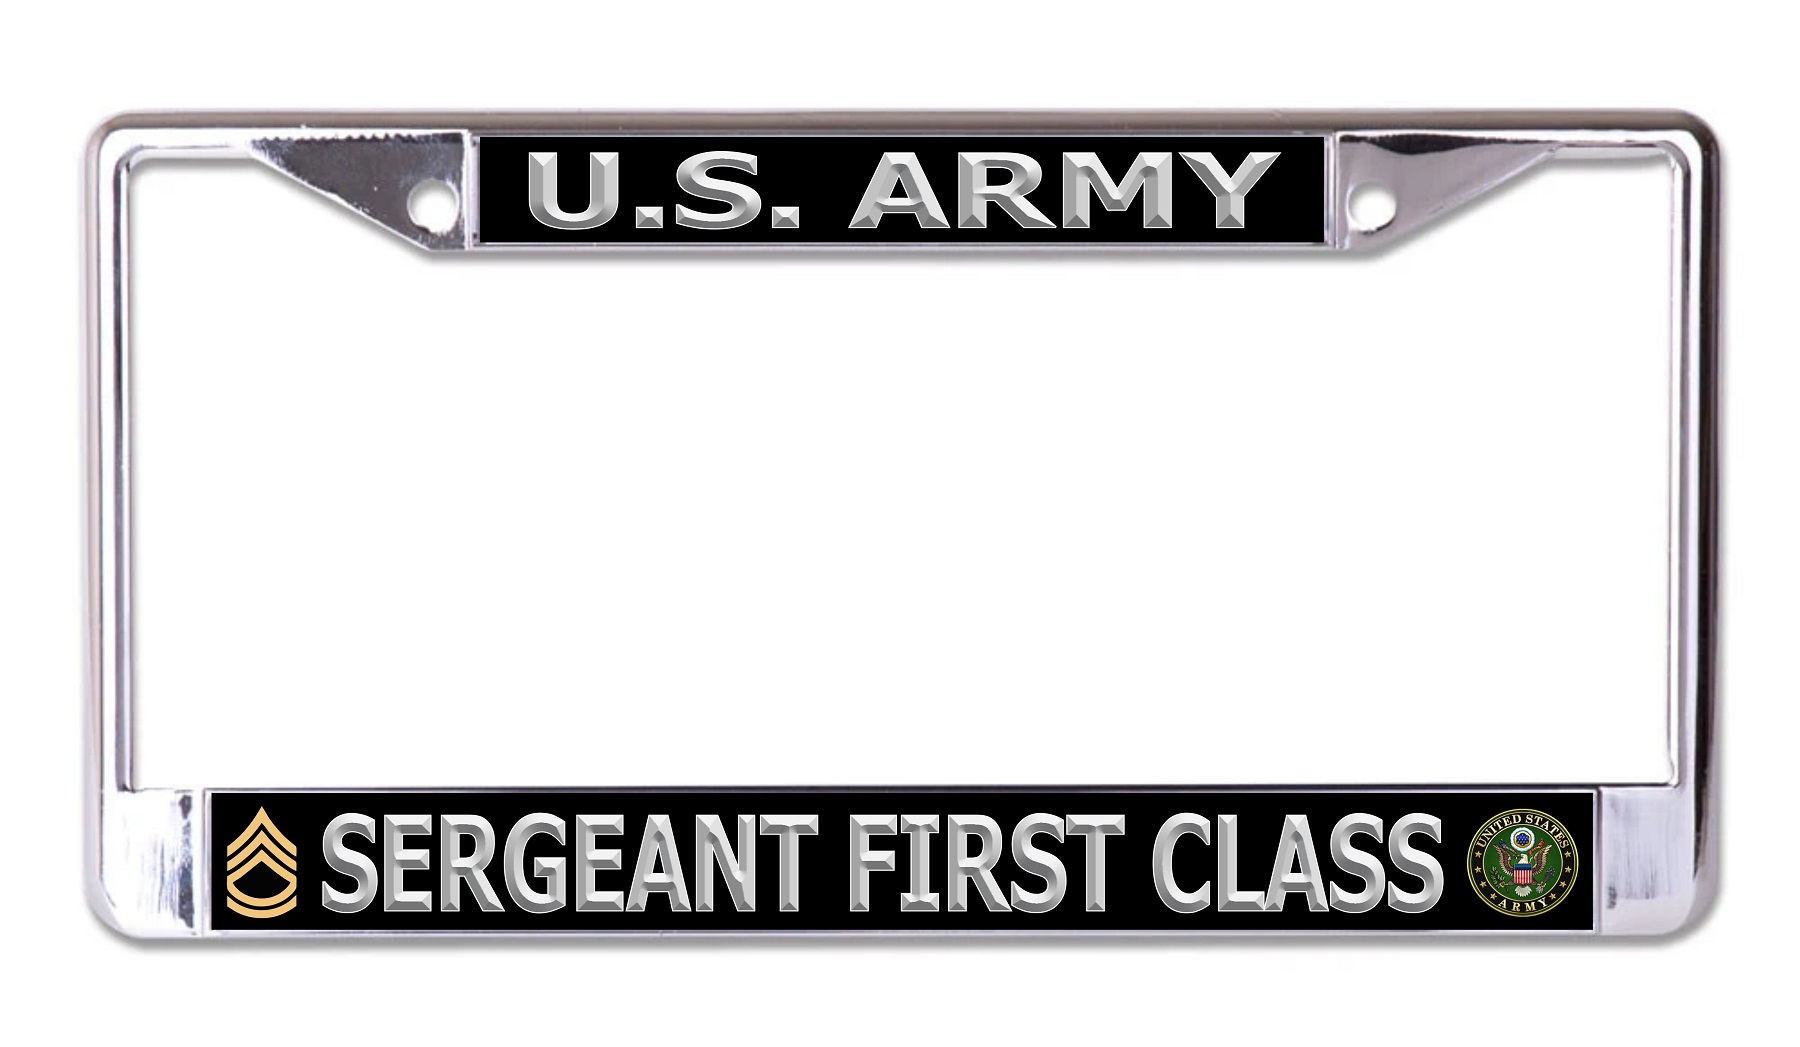 U.S. Army Sergeant First Class Silver Letters Chrome License Plate FRAME